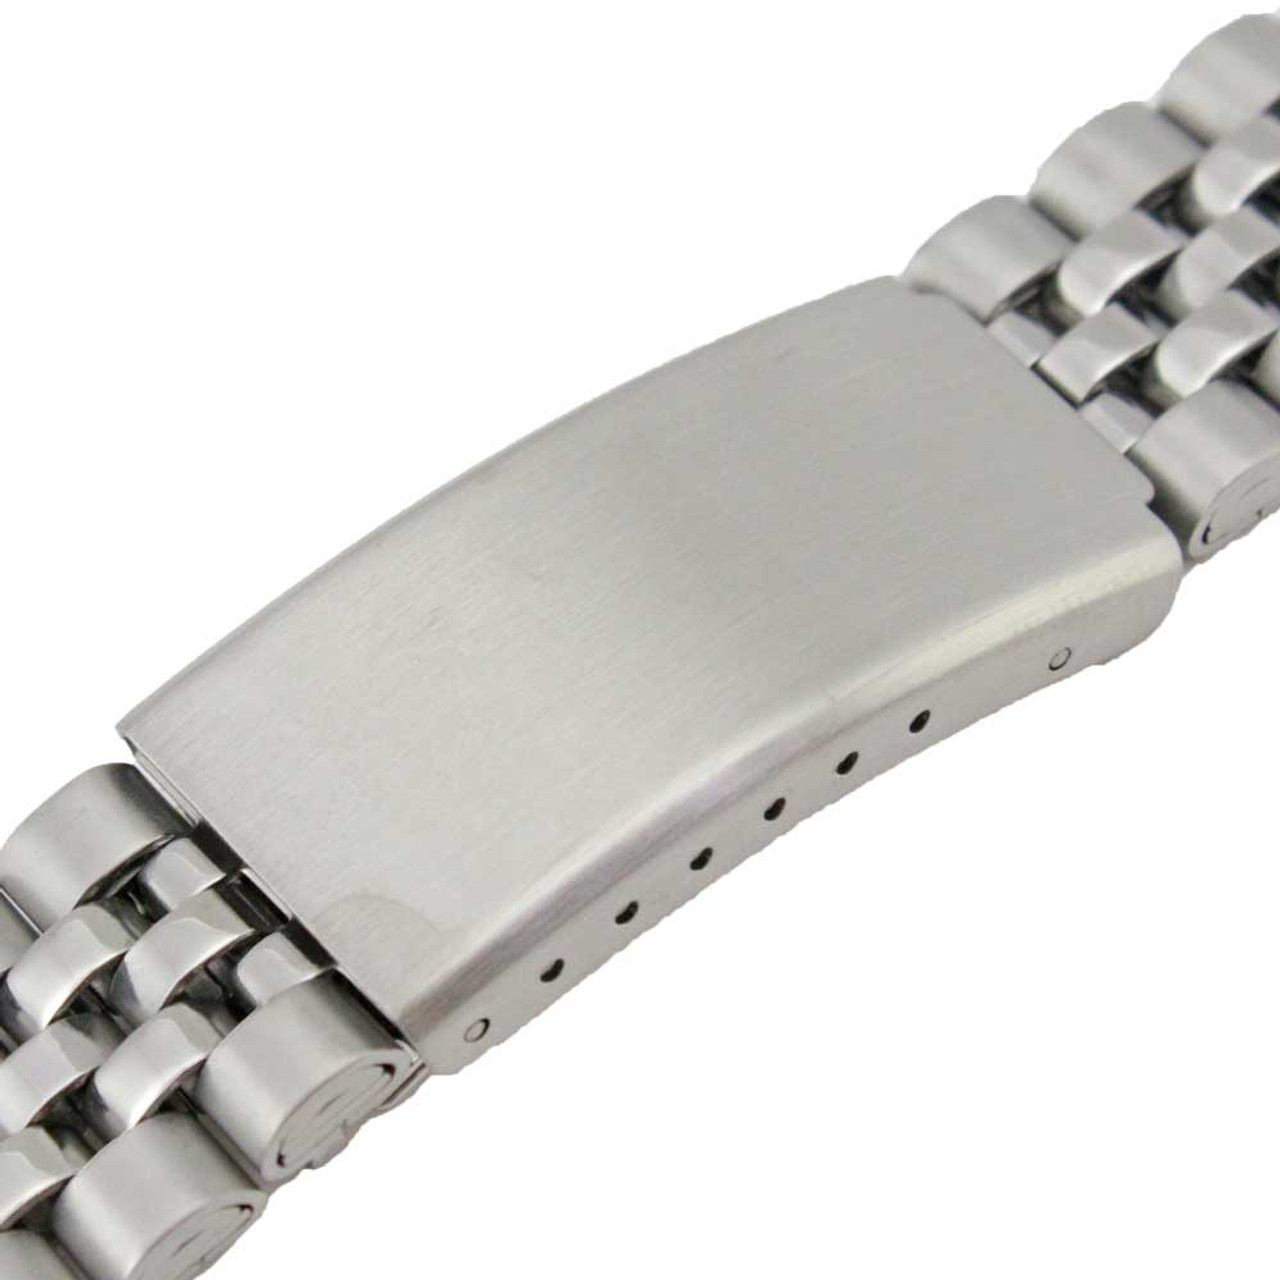 Curved+Straight End Stainless Steel Watch Band For Jubilee